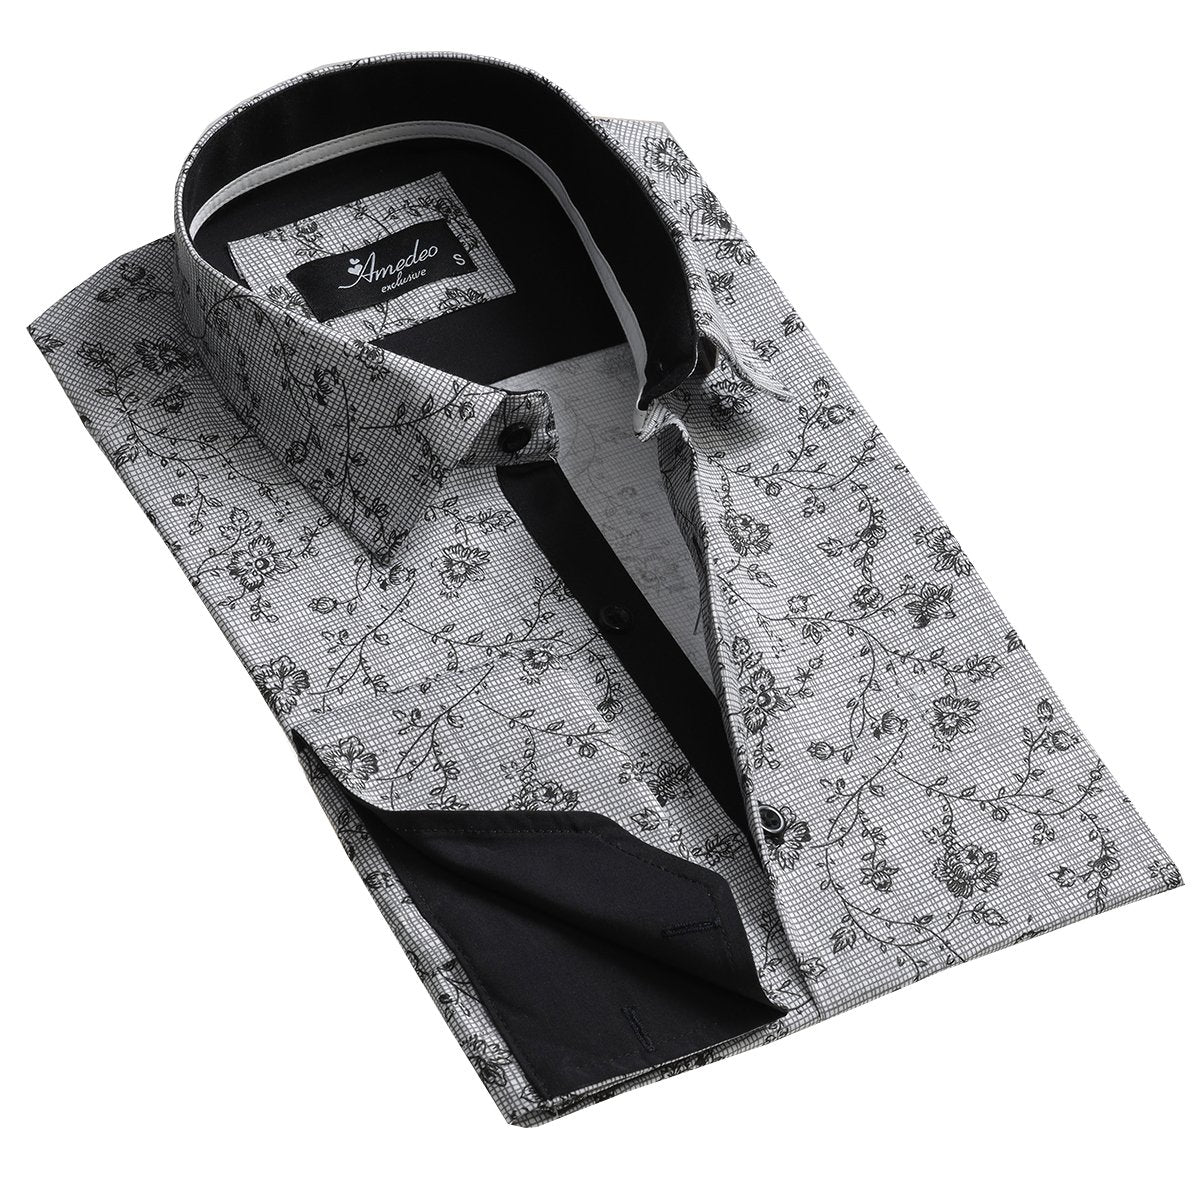 Black and WhiteMens Slim Fit French Cuff Dress Shirts with Cufflink Holes - Casual and Formal - Amedeo Exclusive